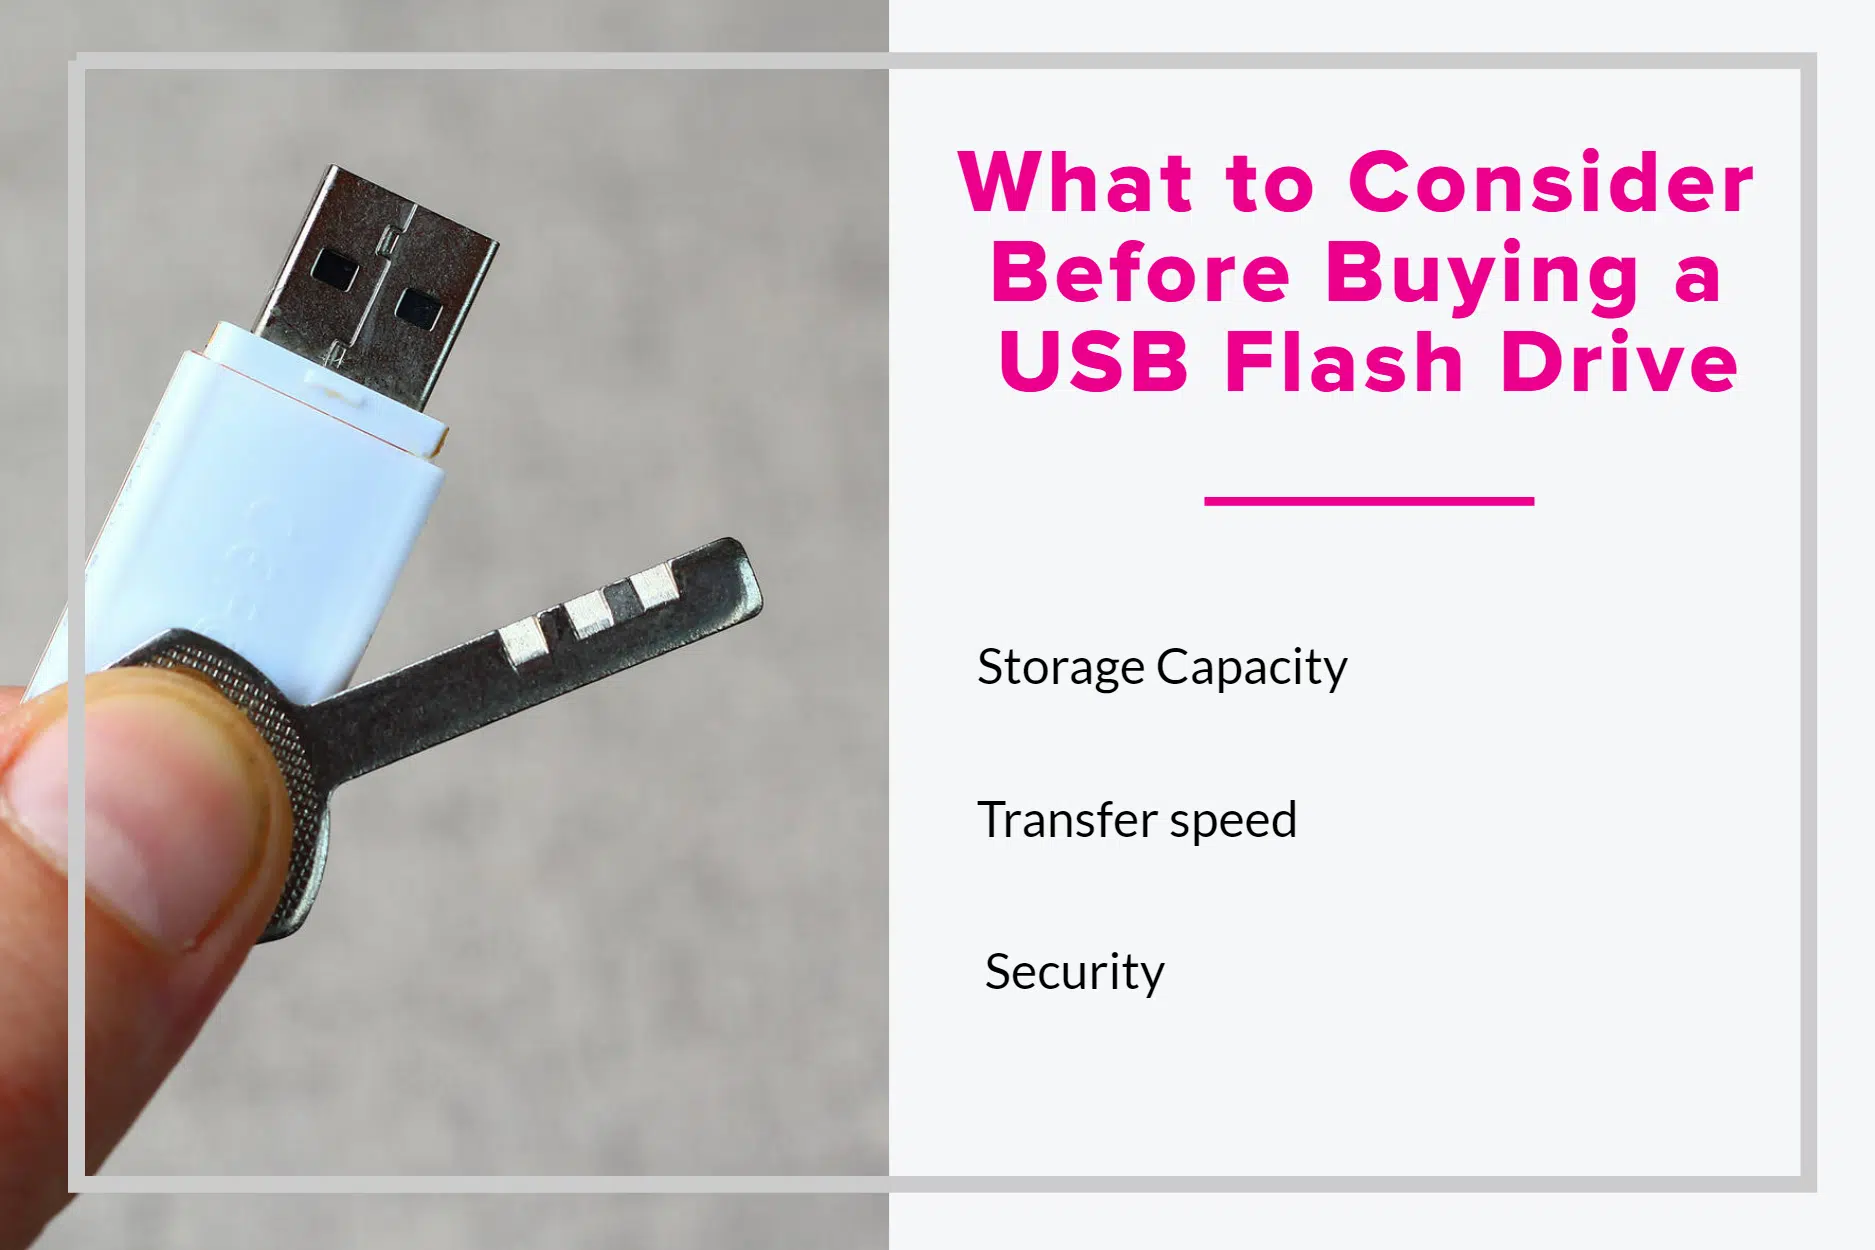 What to consider before buying a USB flash drive